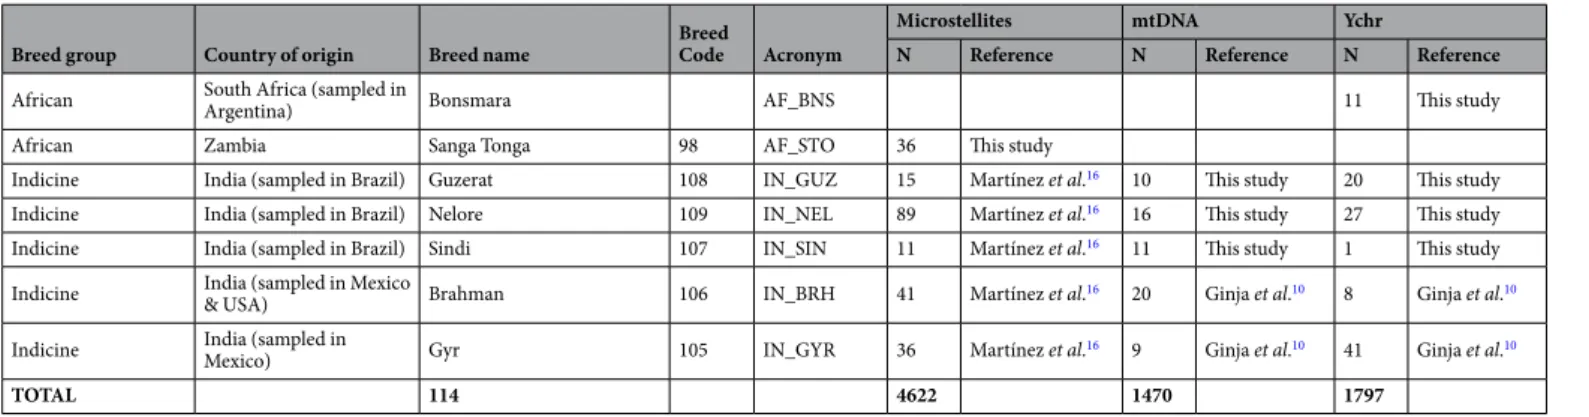 Table 1.  Information on the cattle breeds and geographic groups included in the analysis of mitochondrial,  Y-chromosome and autosomal microsatellite markers